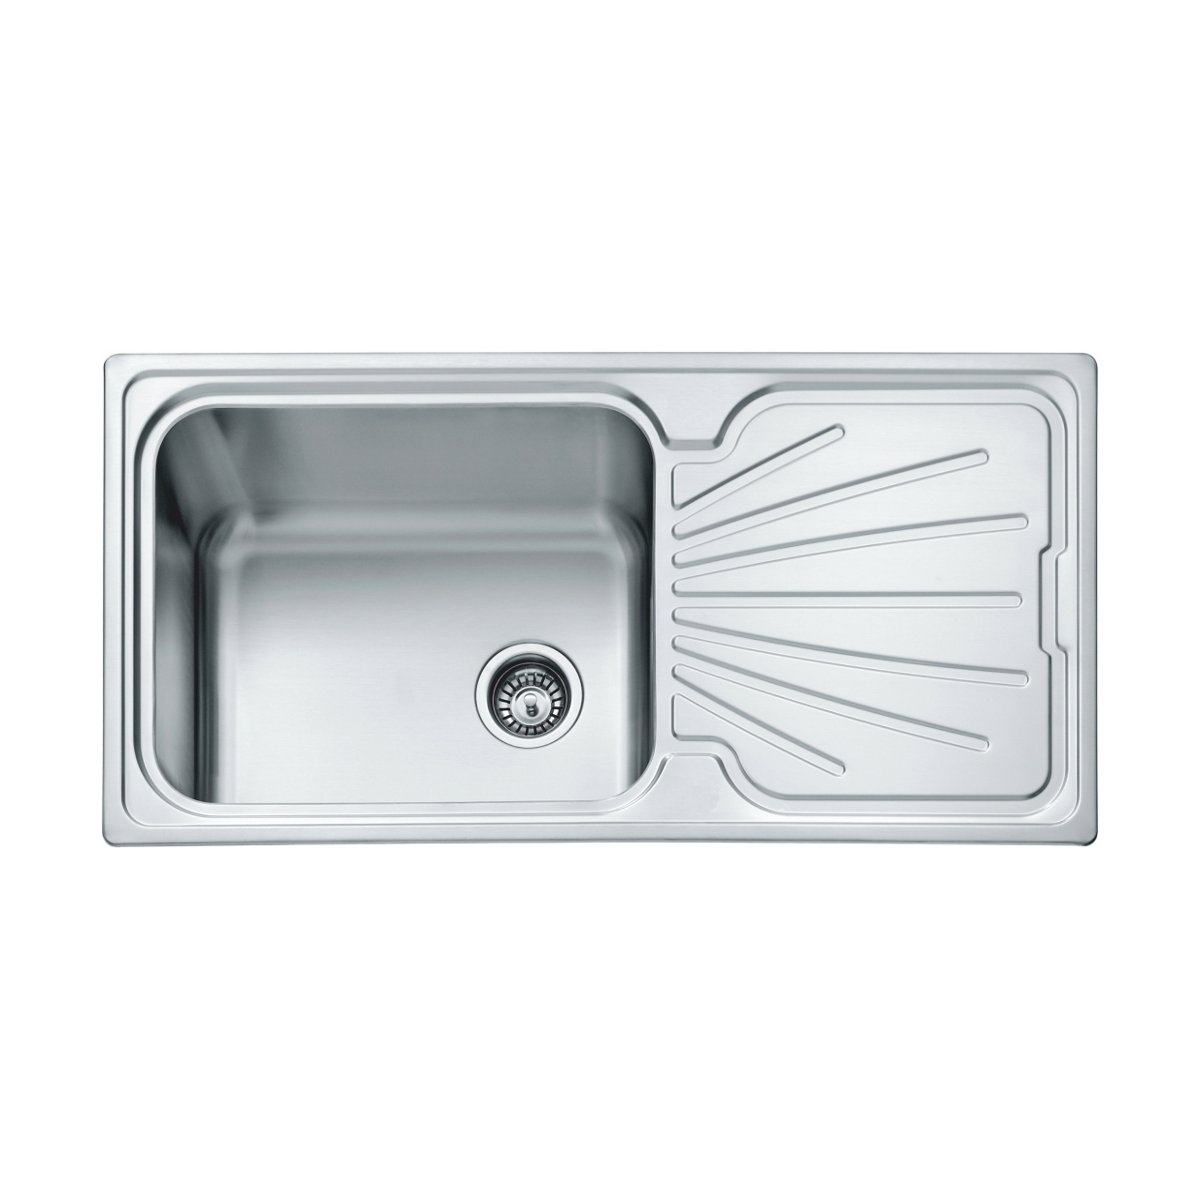 Silk D-100 Macart Modern 1 Bowl Stainless Steel Kitchen Sink with Reversible Drainer 100×50